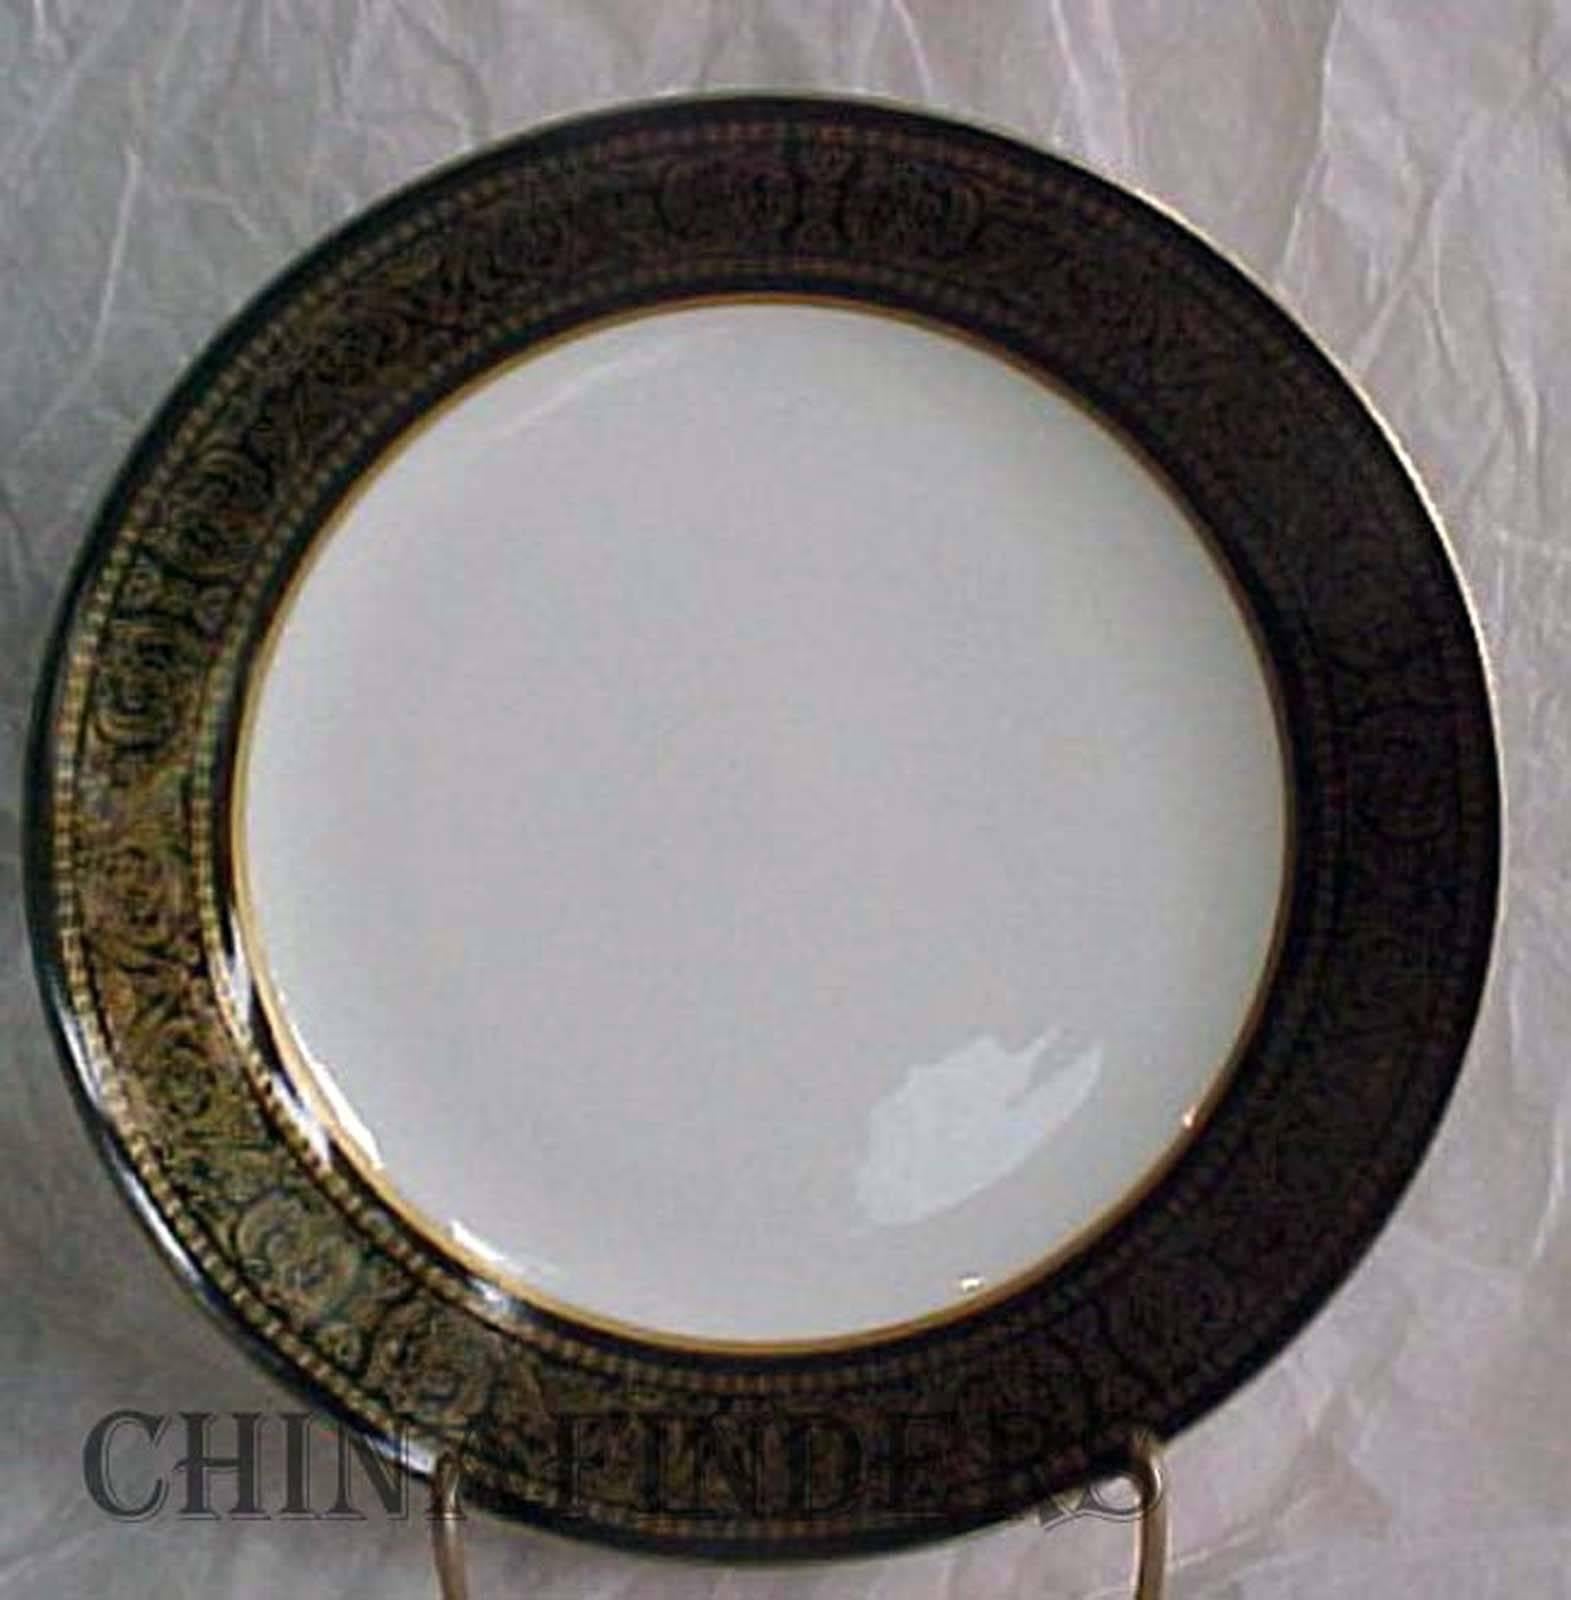 MIKASA china MOUNT HOLYOKE A1-114 pattern 91-piece SET SERVICE for 12 + 6 Serving Pieces

in great condition free from chips, cracks, crazing, breaks, stains, or discoloration and with only a minimum of use.

• Contains 12 cups, 12 saucers, 12